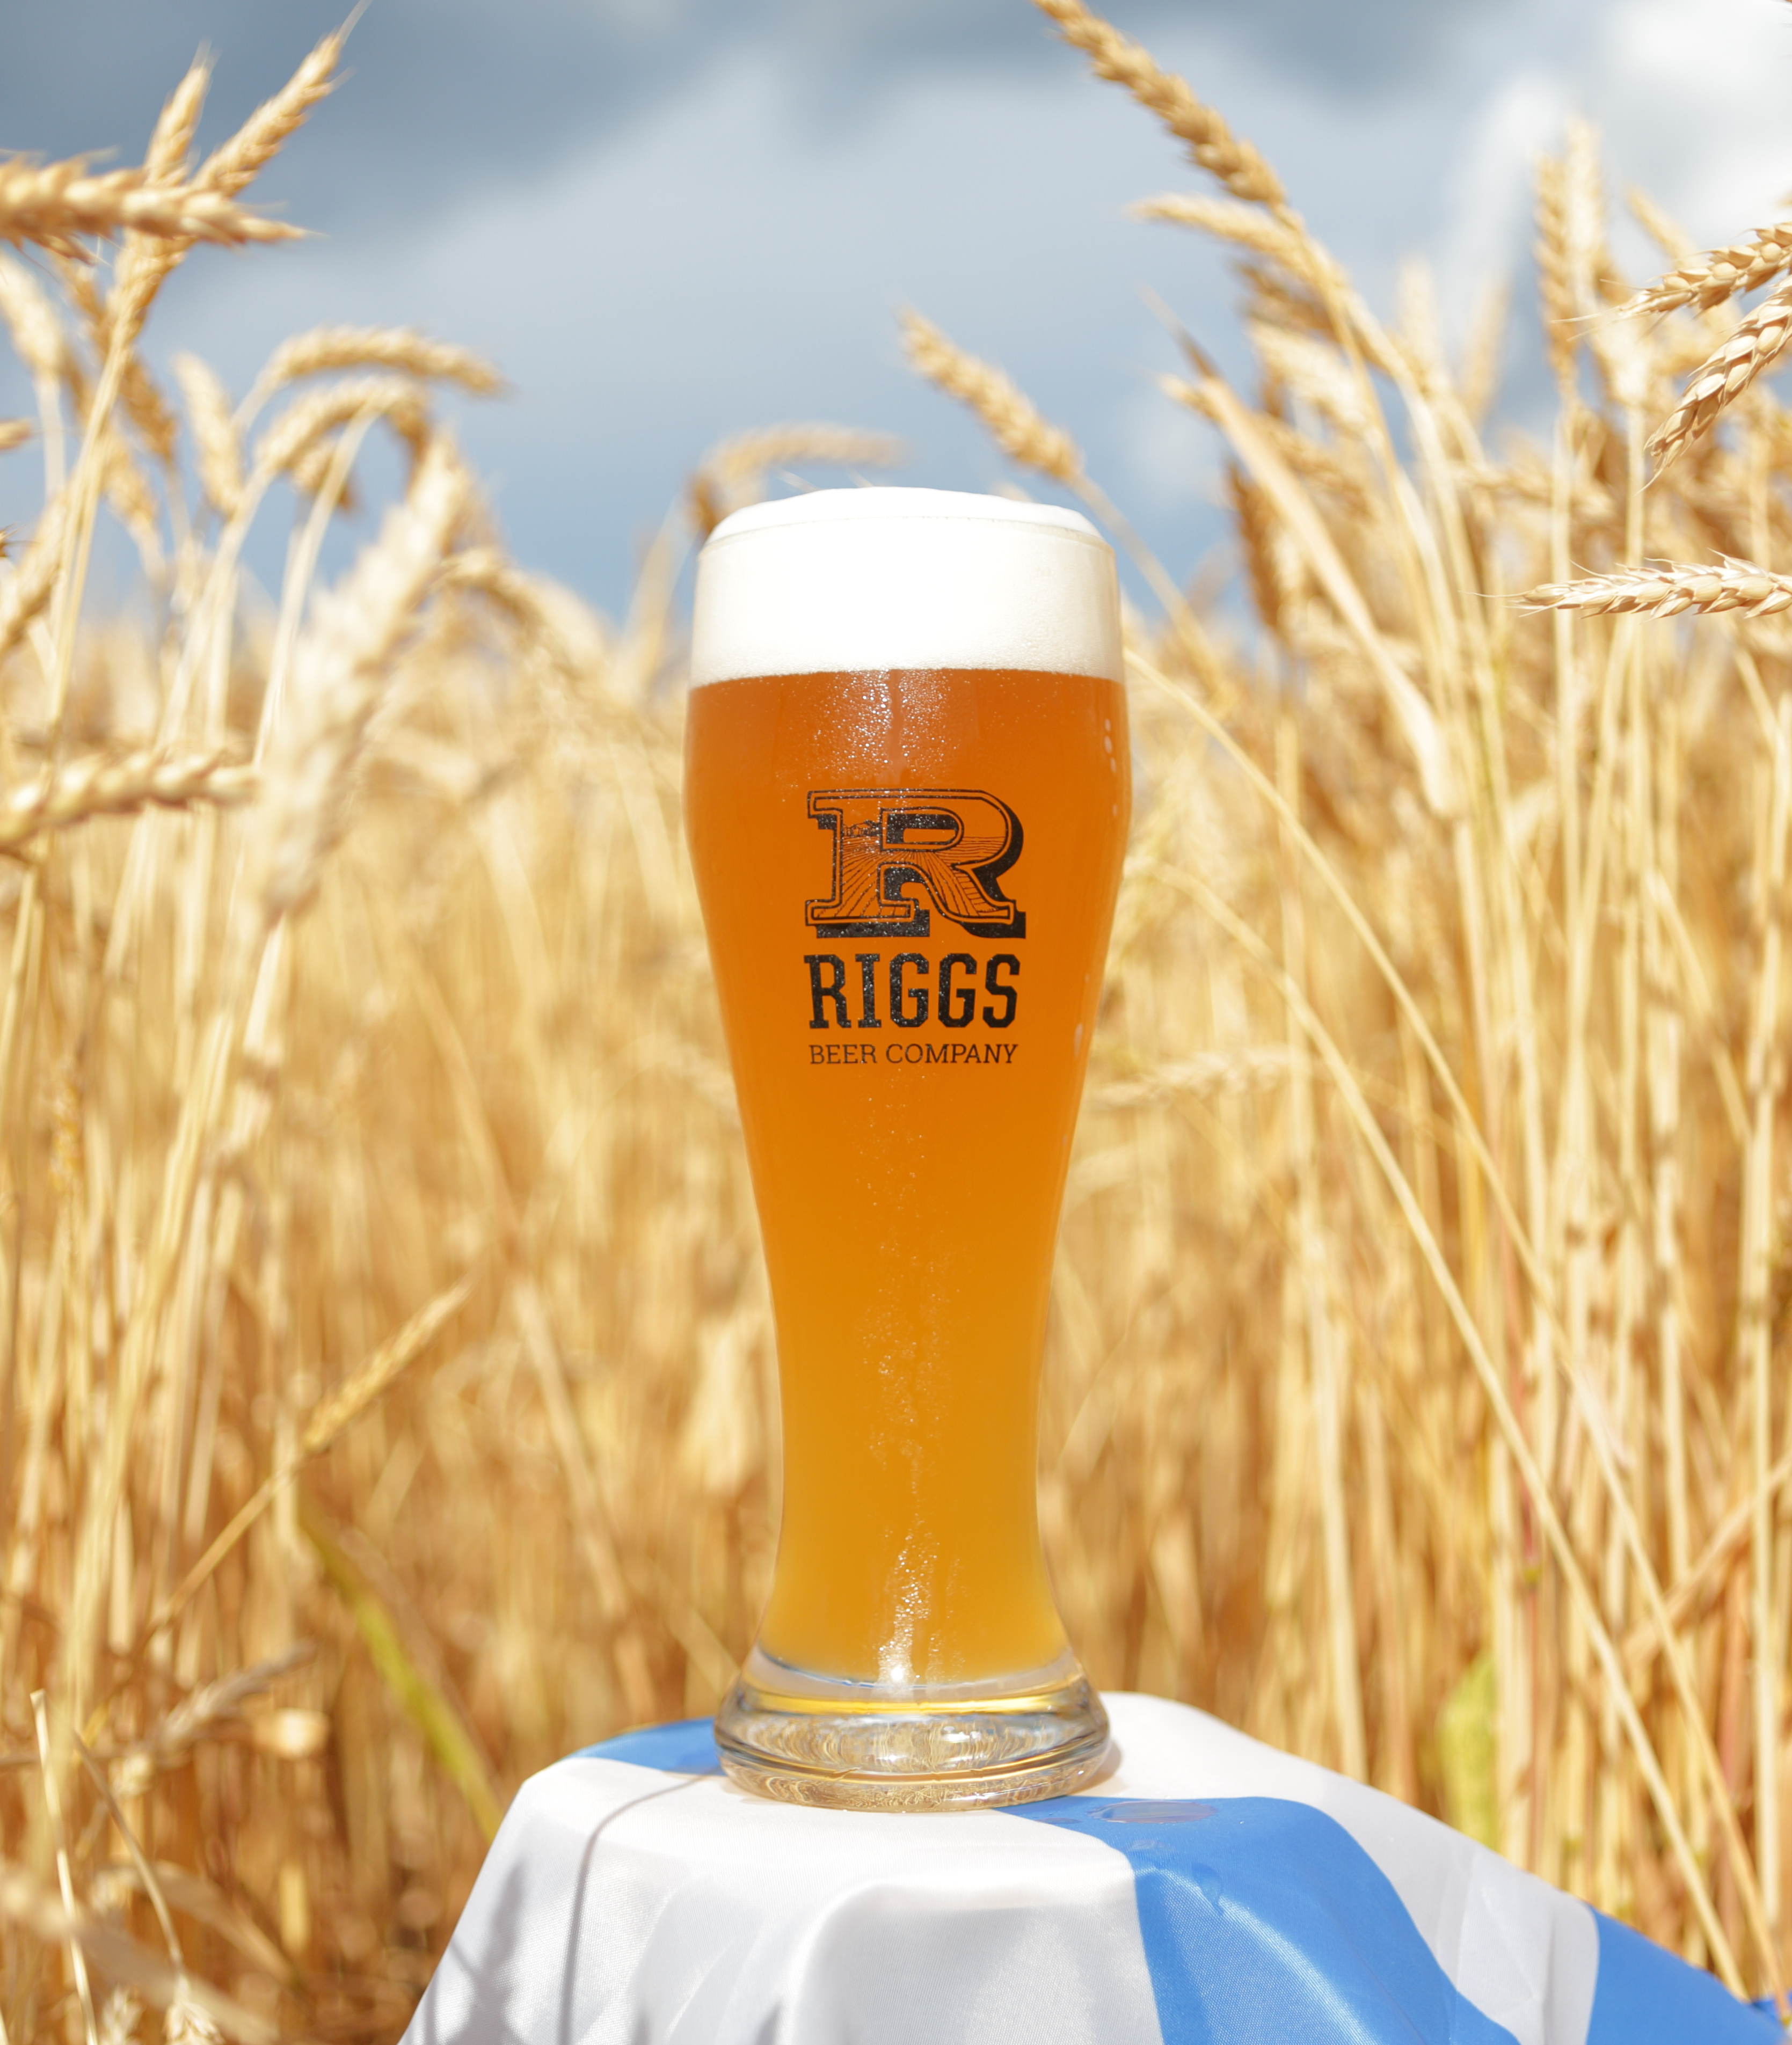 Riggs Beer Company beer glass in a cornfield